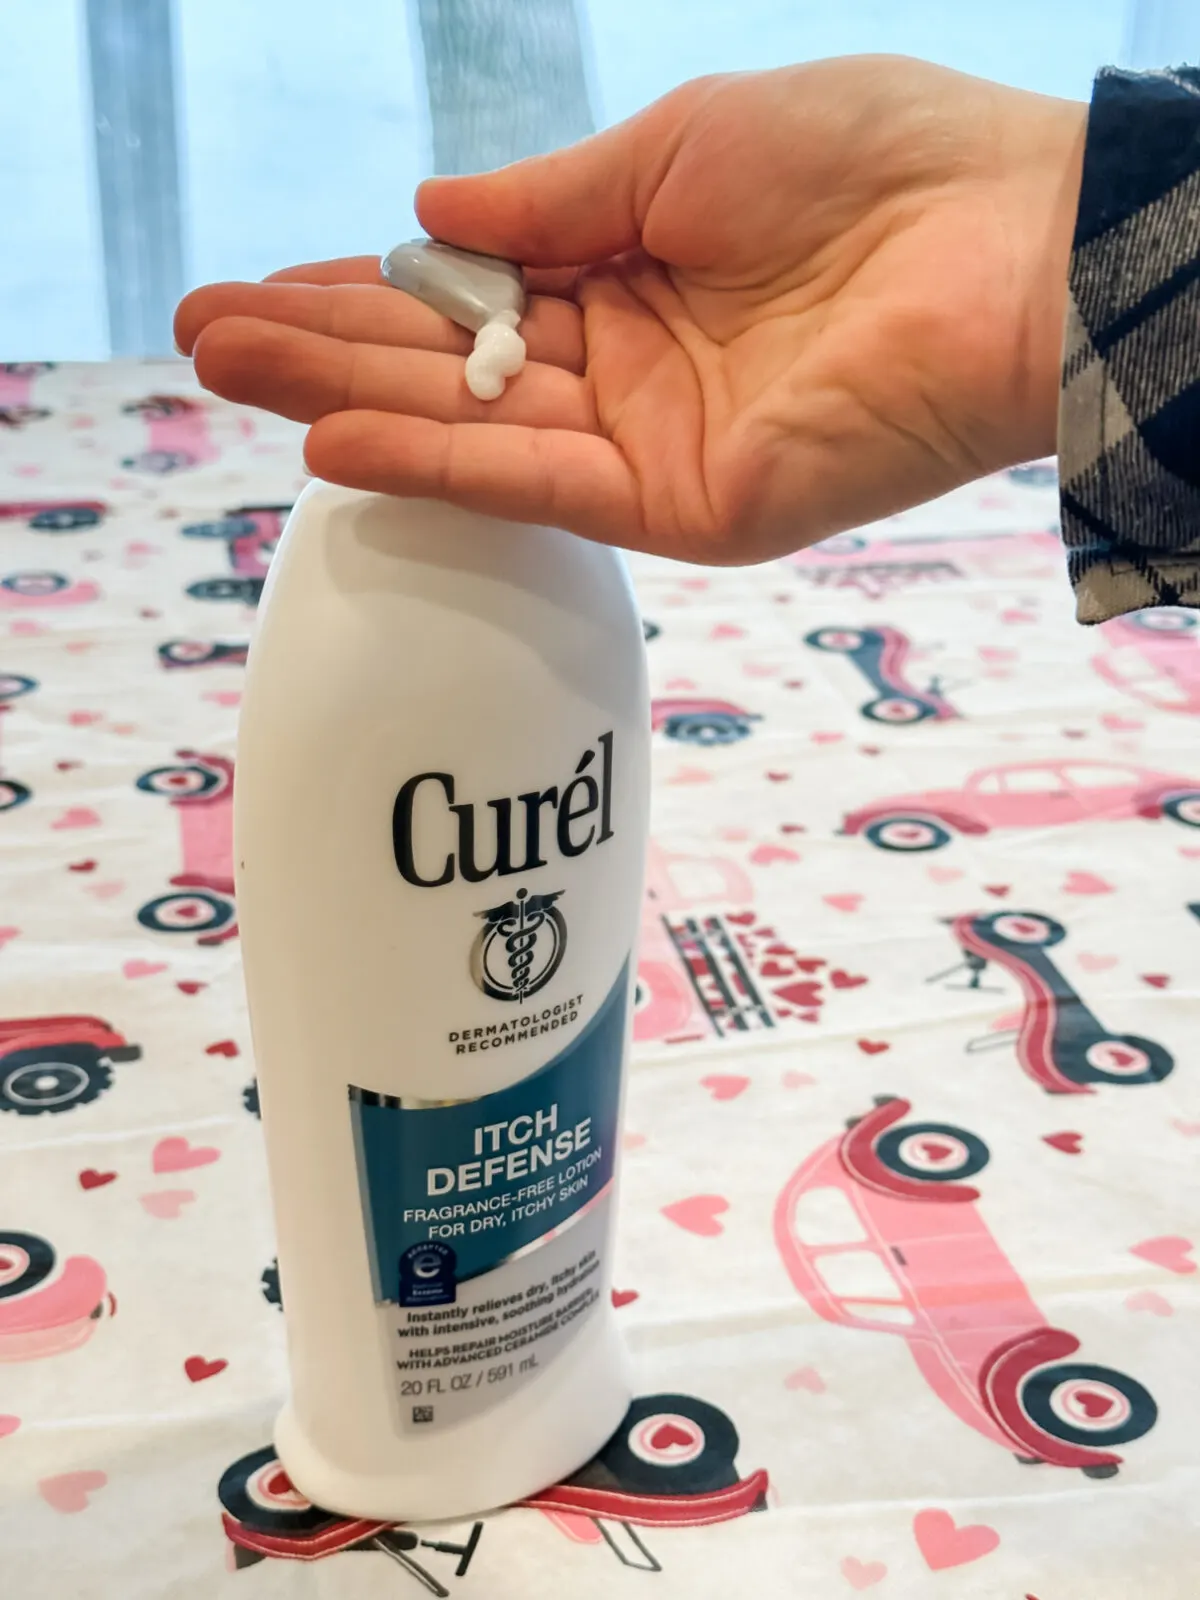 Curel Itch Defense:  Ditch the Winter Itch for You and Your Little Ones With Curél